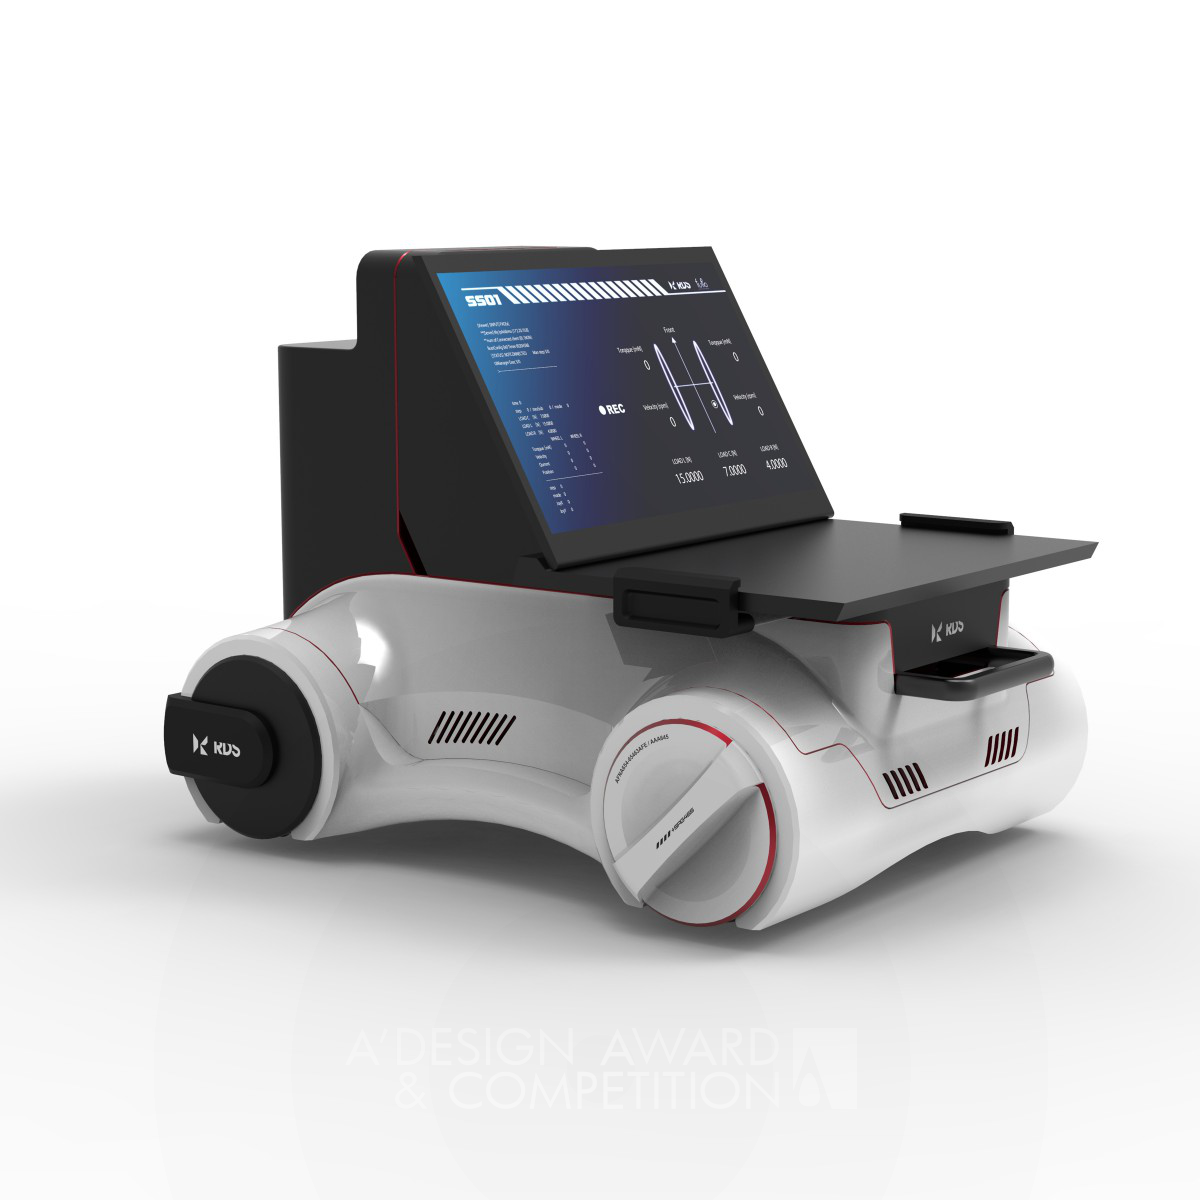 Rds Introduces Gait Analysis Robot for Medical Research and Diagnosis